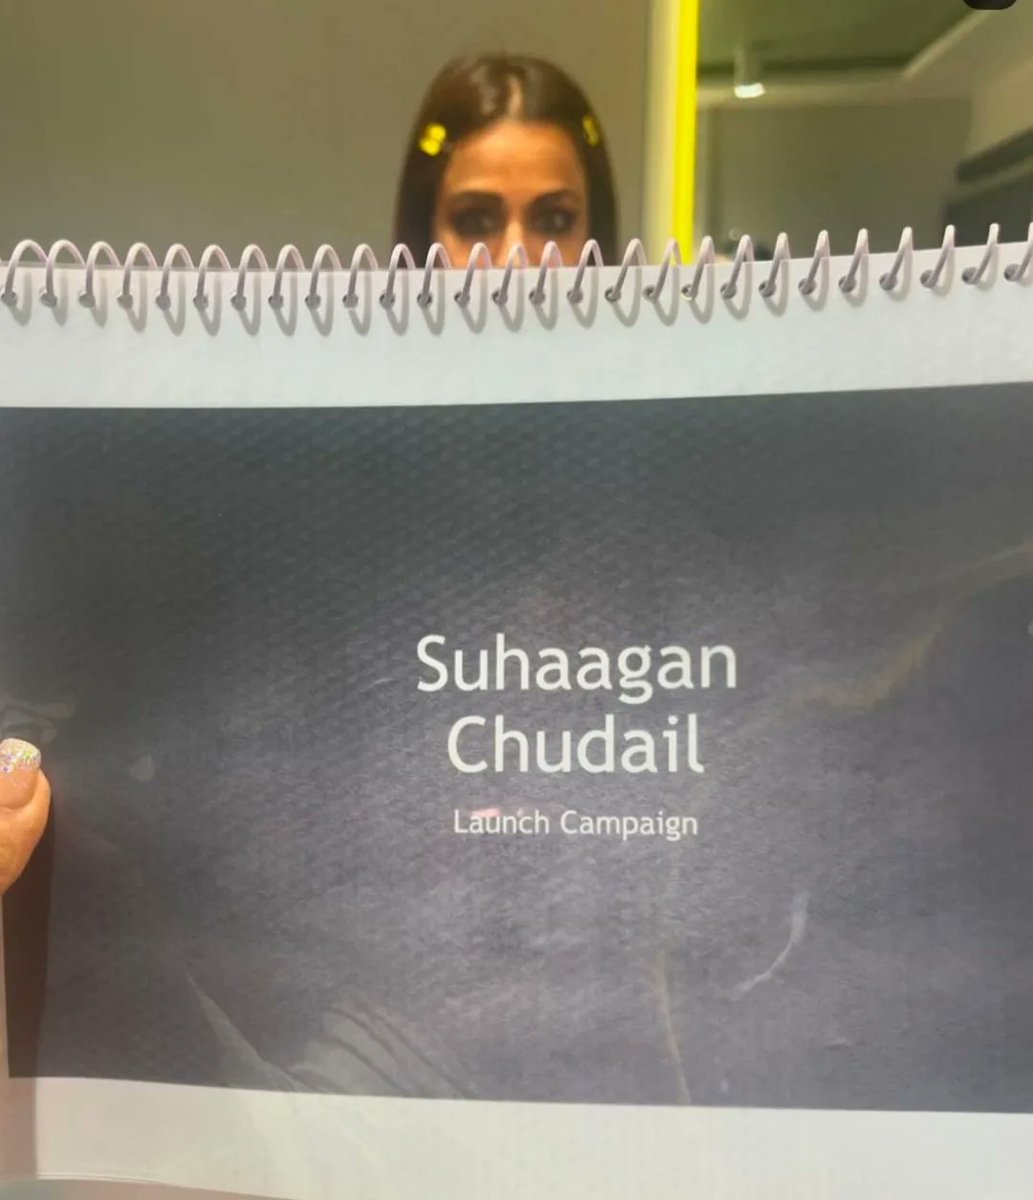 Let's the shooting begin 

#suhaaganChudail  ALL THE BEST TEAM 💖
#niasharma